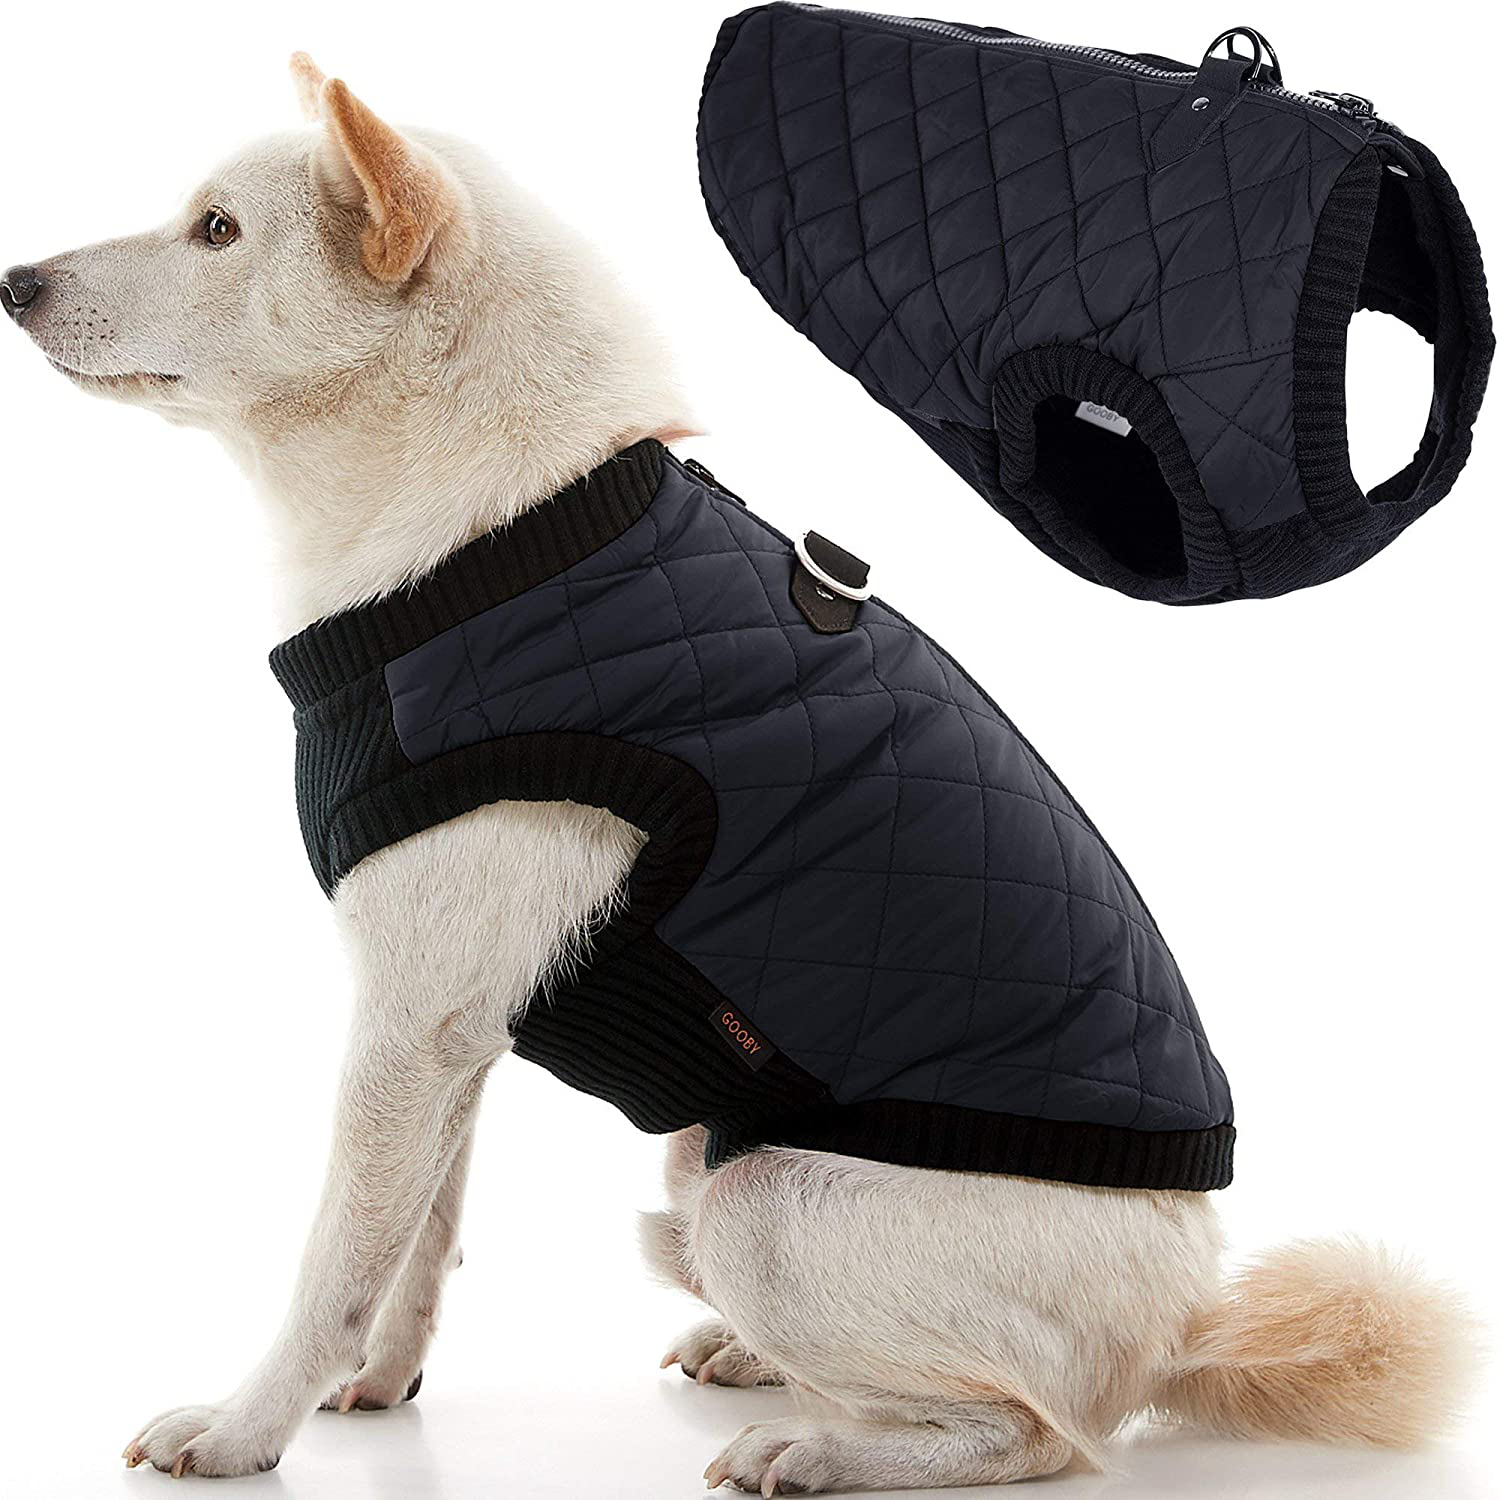 Gooby Fashion Vest Dog Jacket - Warm Zip up Dog Bomber Vest with Dual D Ring Leash - Winter Water Resistant Small Dog Sweater - Dog Clothes for Small Dogs Boy or Medium Dogs for Indoor and Outdoor Use